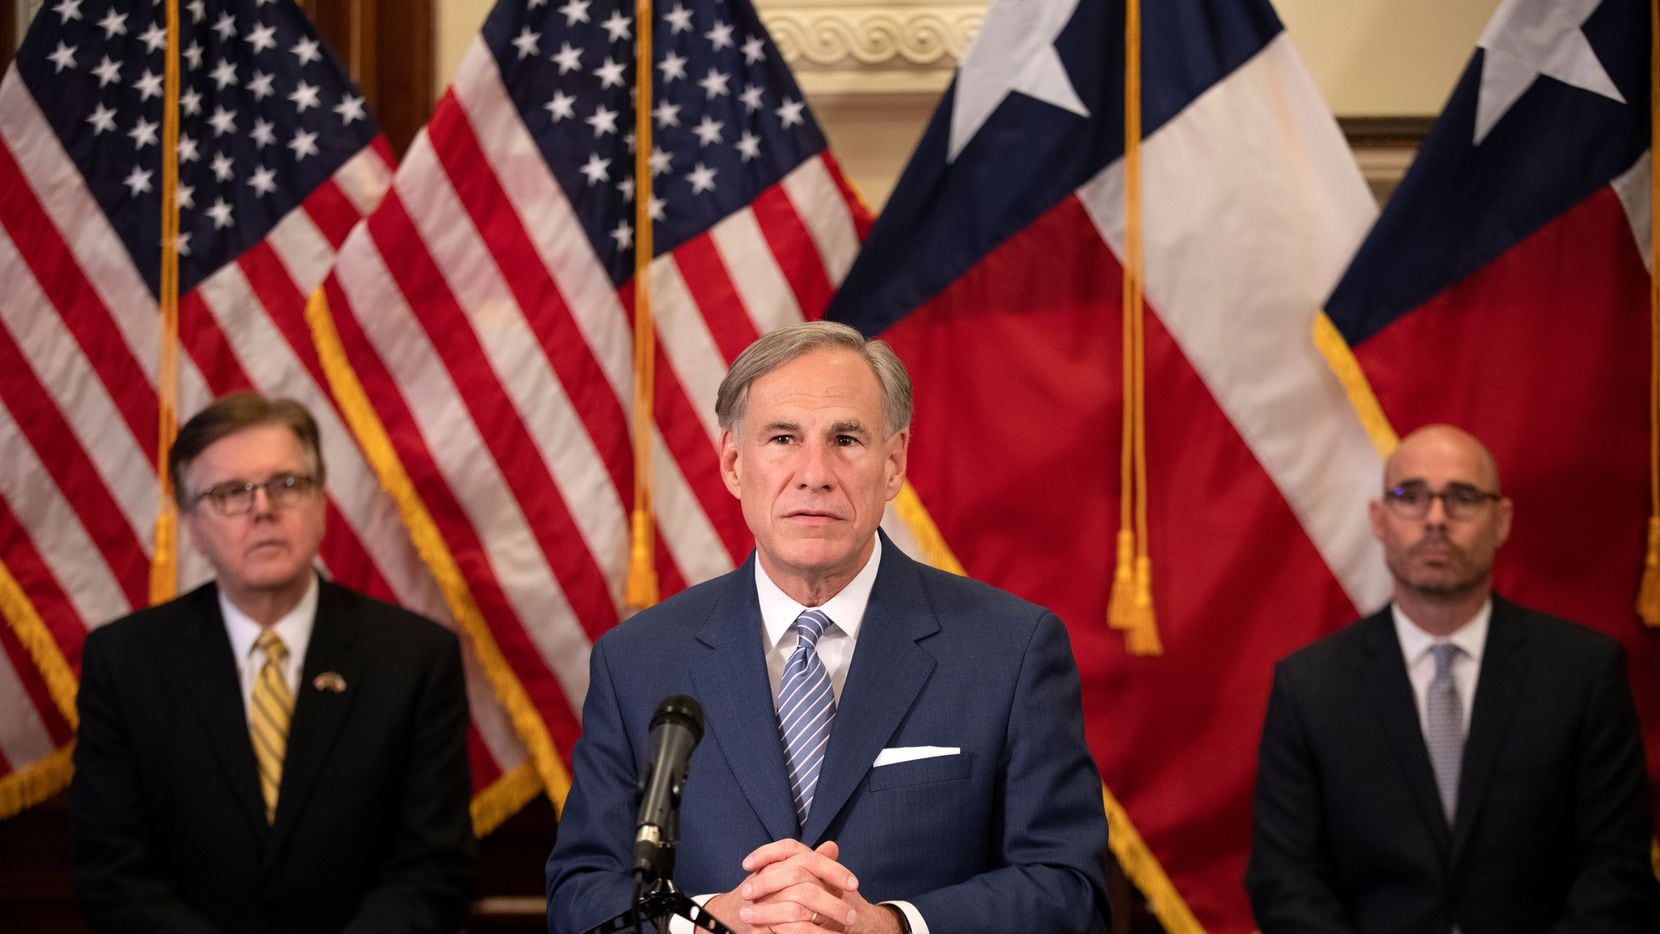 31 of the 39 members of Gov. Greg Abbott's Special Advisory Council on reopening Texas after coronavirus have donated to his campaigns, according to a Dallas Morning News analysis. He is shown announcing the group on Friday, with Lt. Gov. Dan Patrick (left) and Speaker Dennis Bonnen.